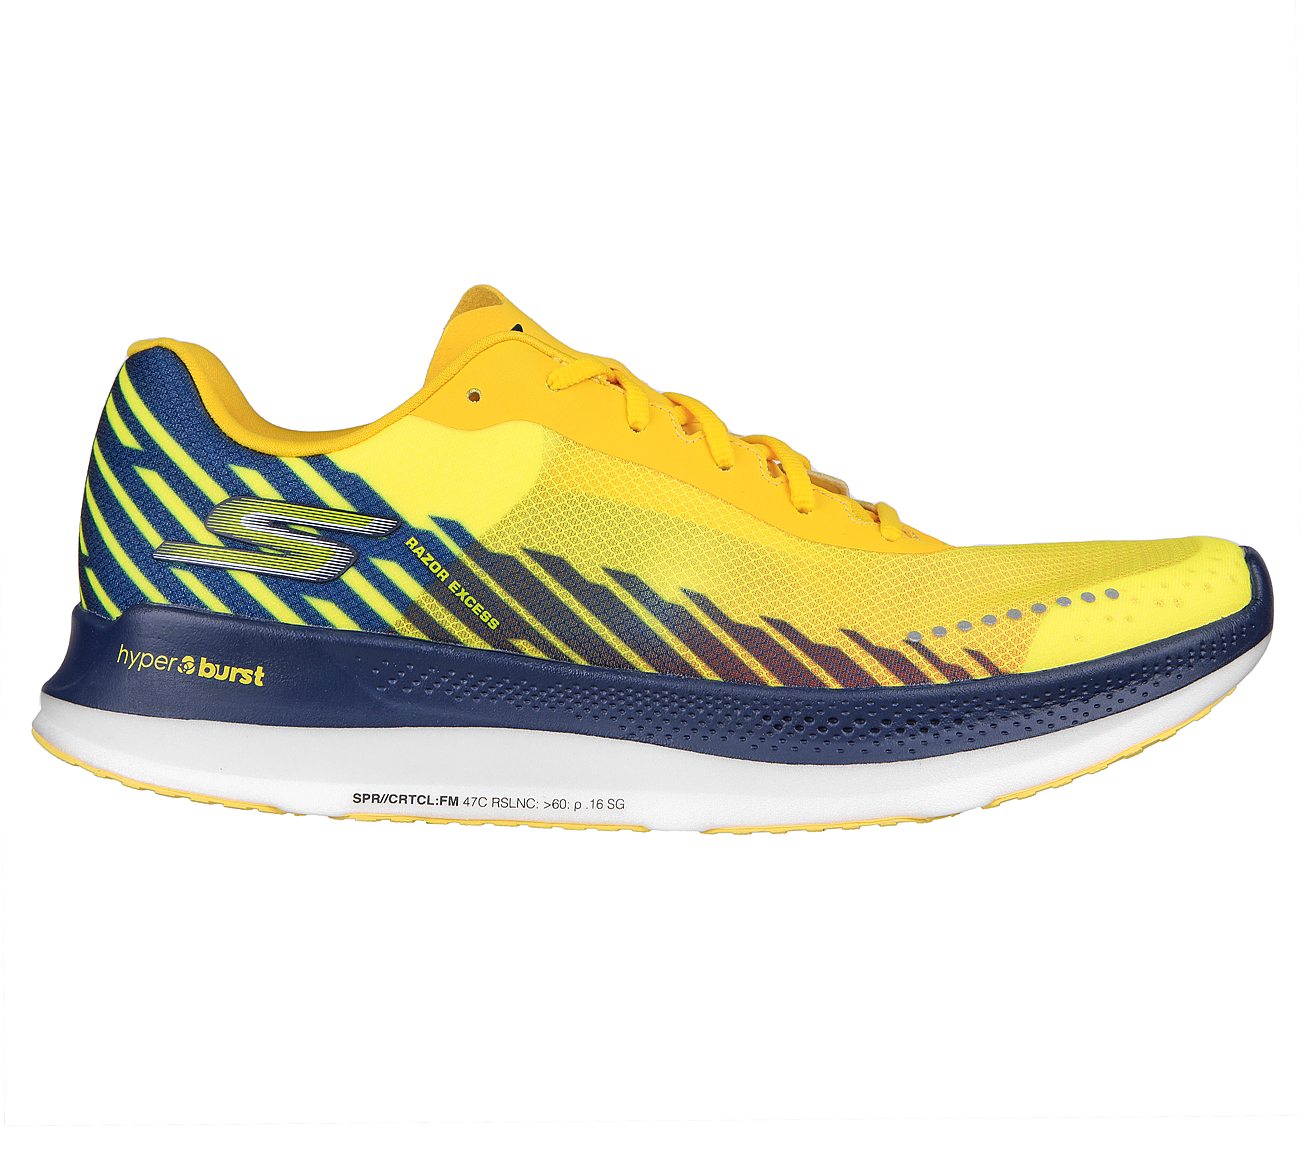 GO RUN RAZOR EXCESS, YELLOW/NAVY Footwear Lateral View